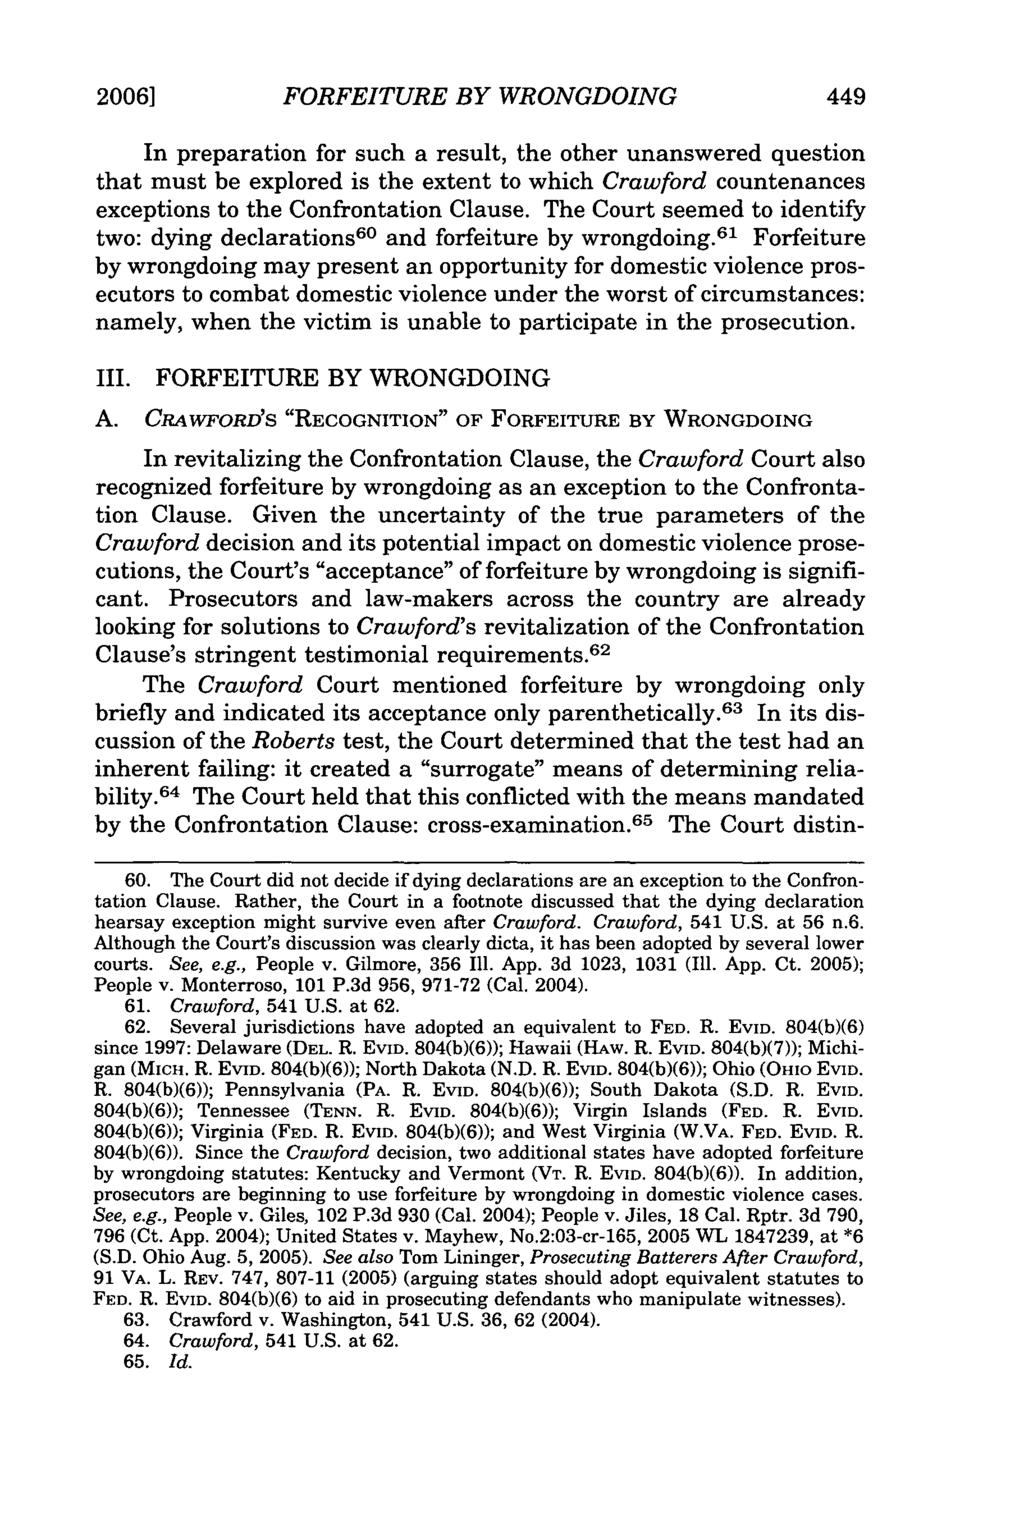 2006] FORFEITURE BY WRONGDOING In preparation for such a result, the other unanswered question that must be explored is the extent to which Crawford countenances exceptions to the Confrontation